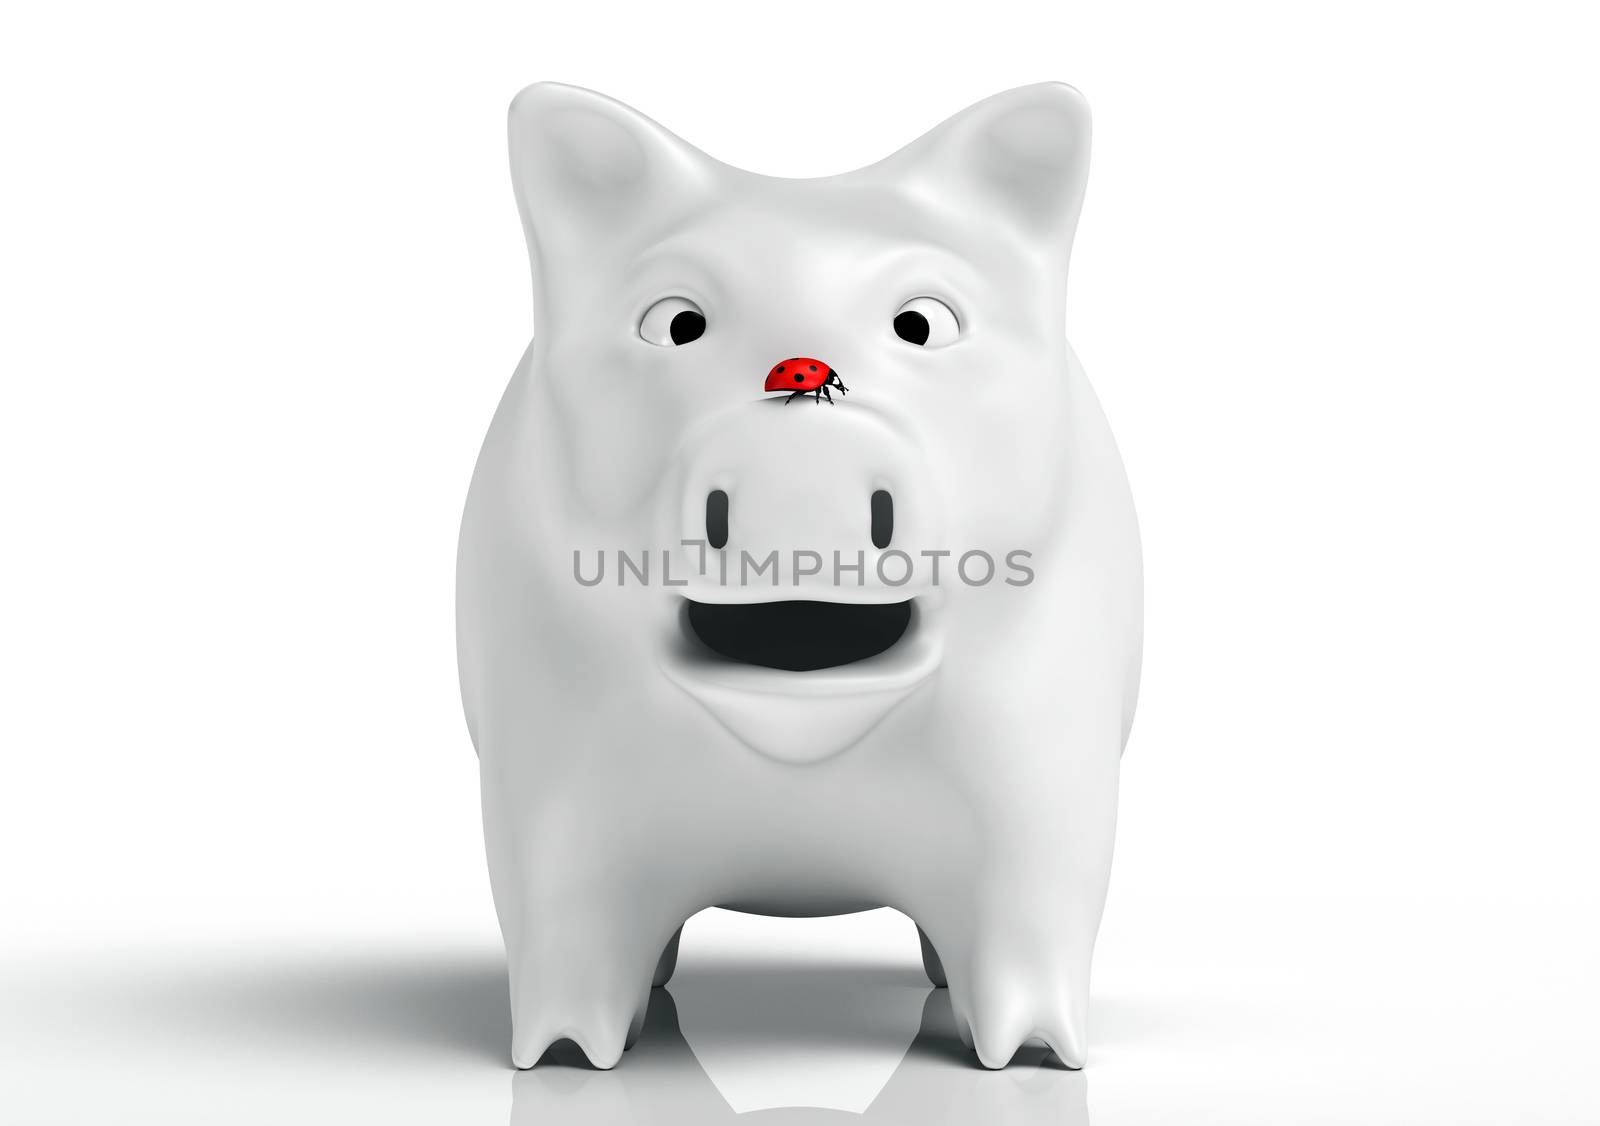 Surprised white piggy bank by TaiChesco